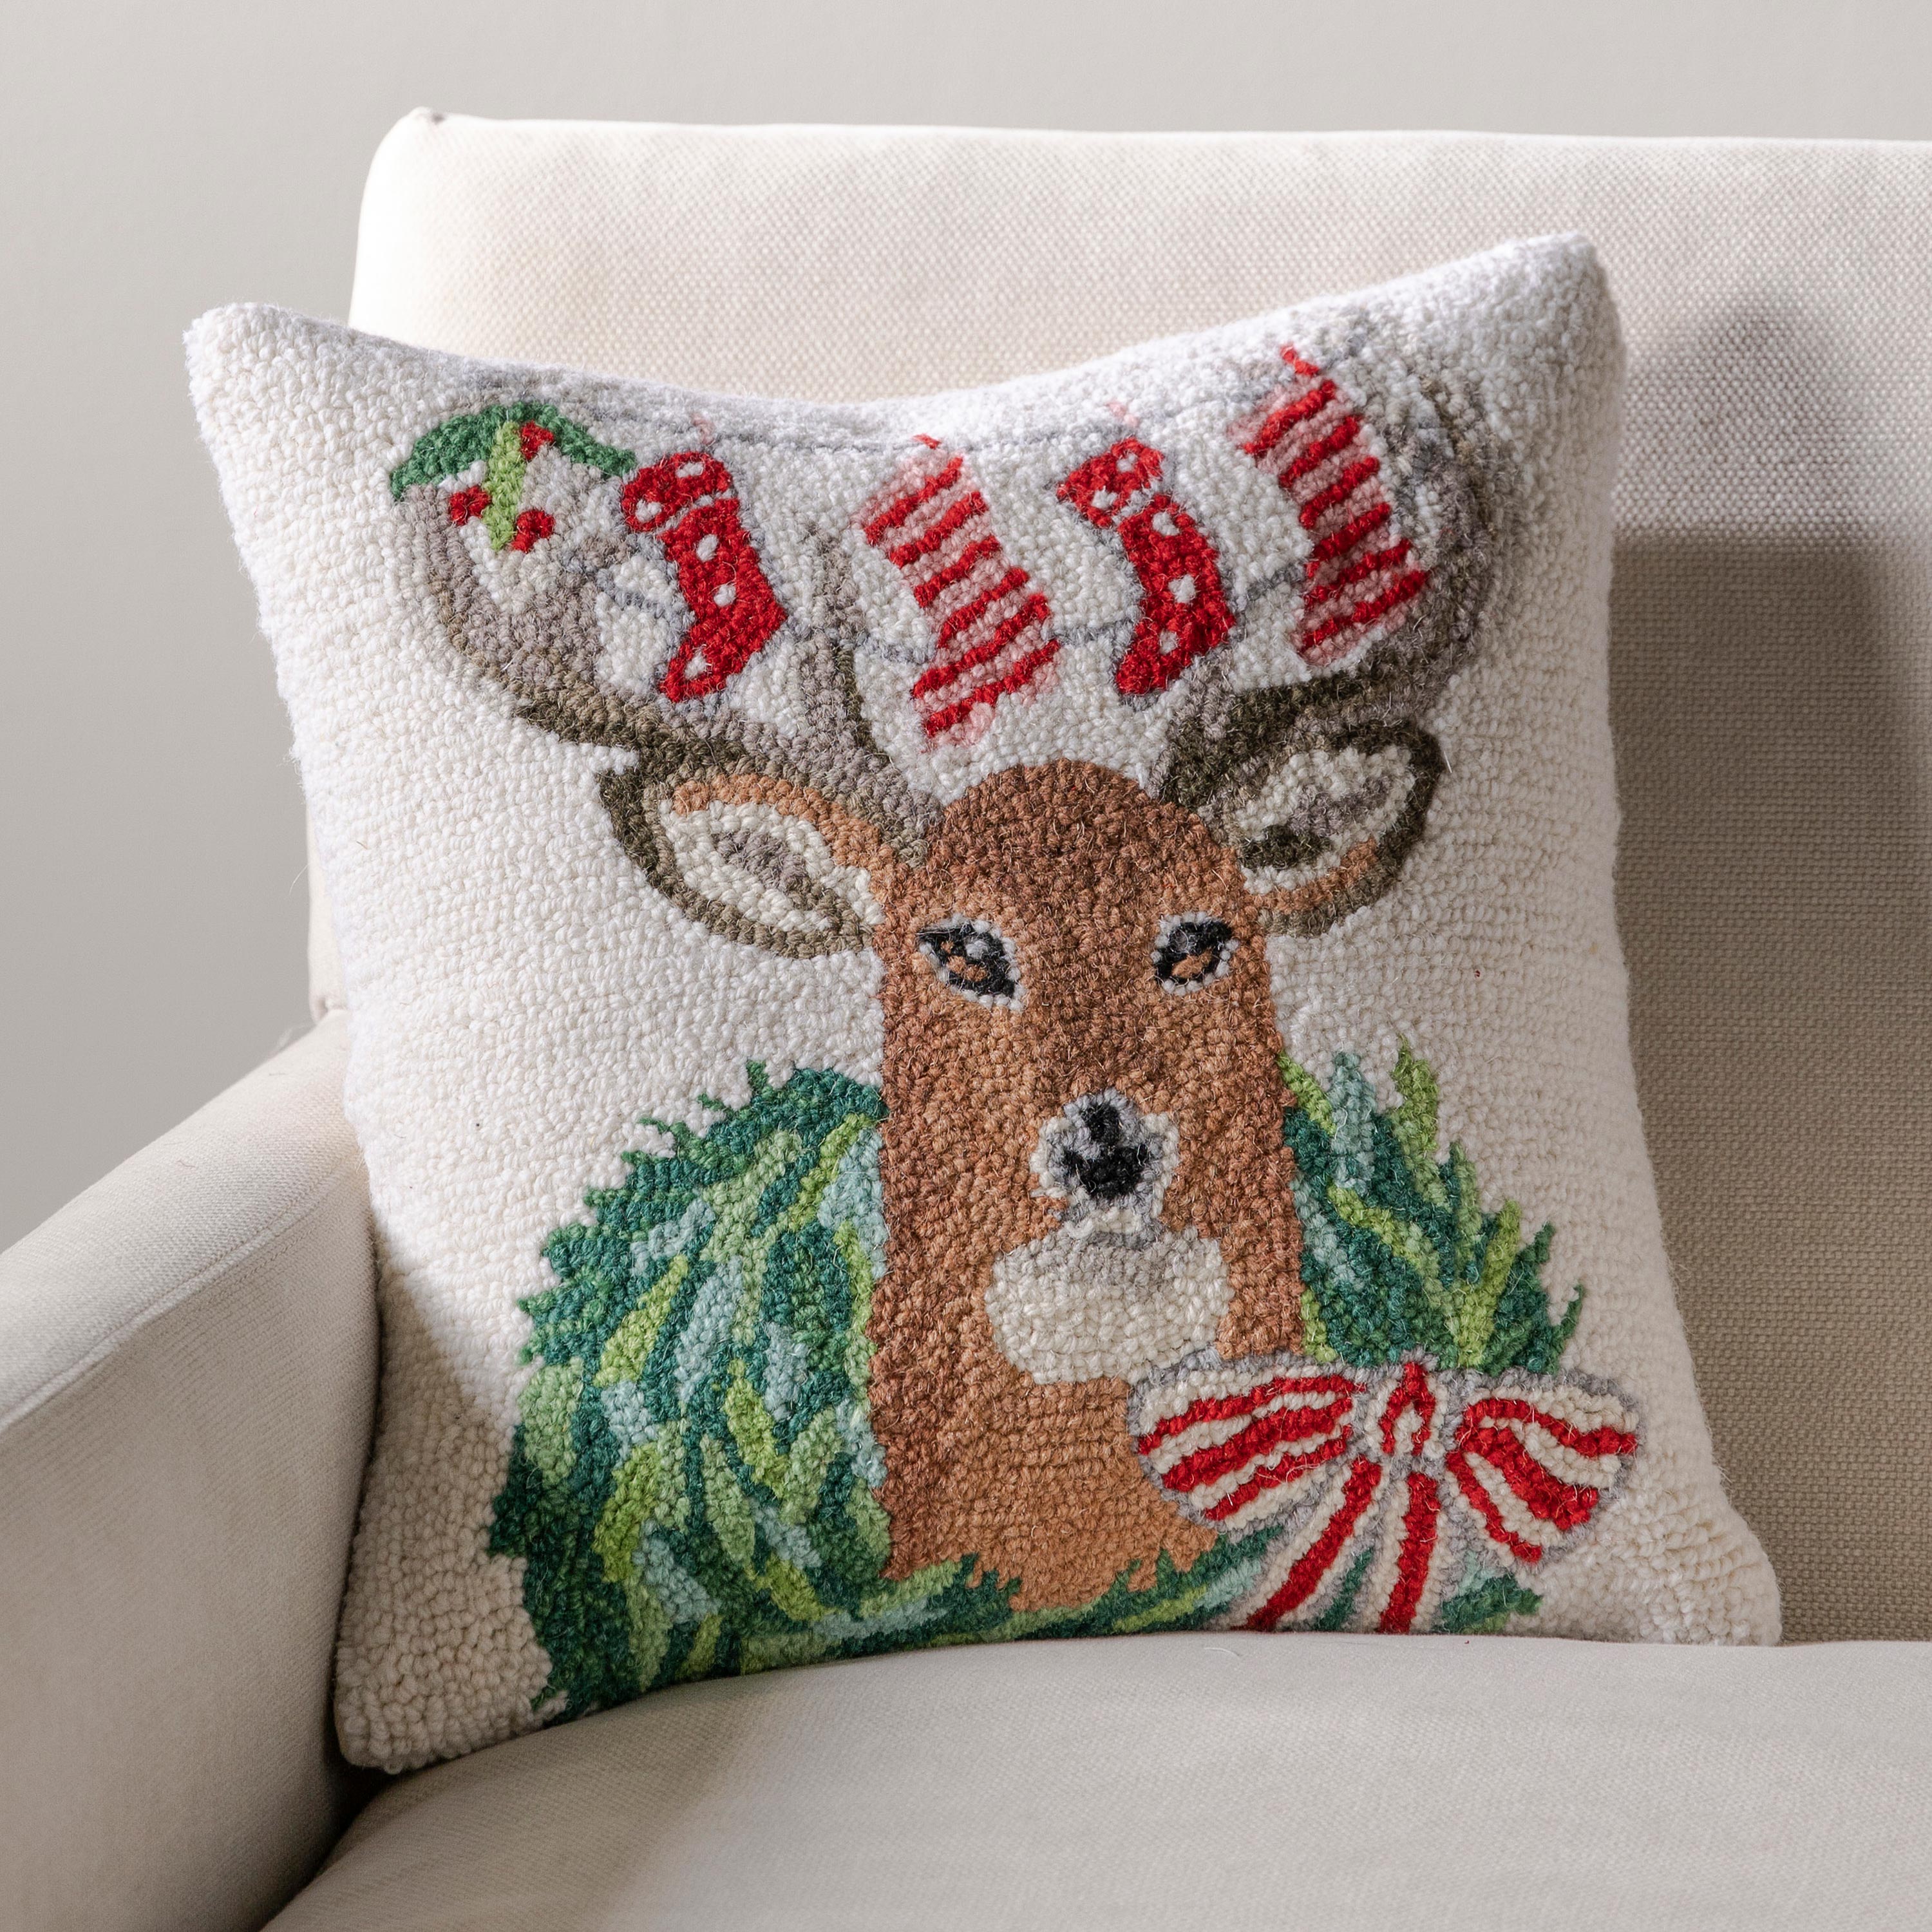 Unique Couch Throw Pillows  Marley Ungaro - Christmas Wreath Panda -  DiaNoche Designs